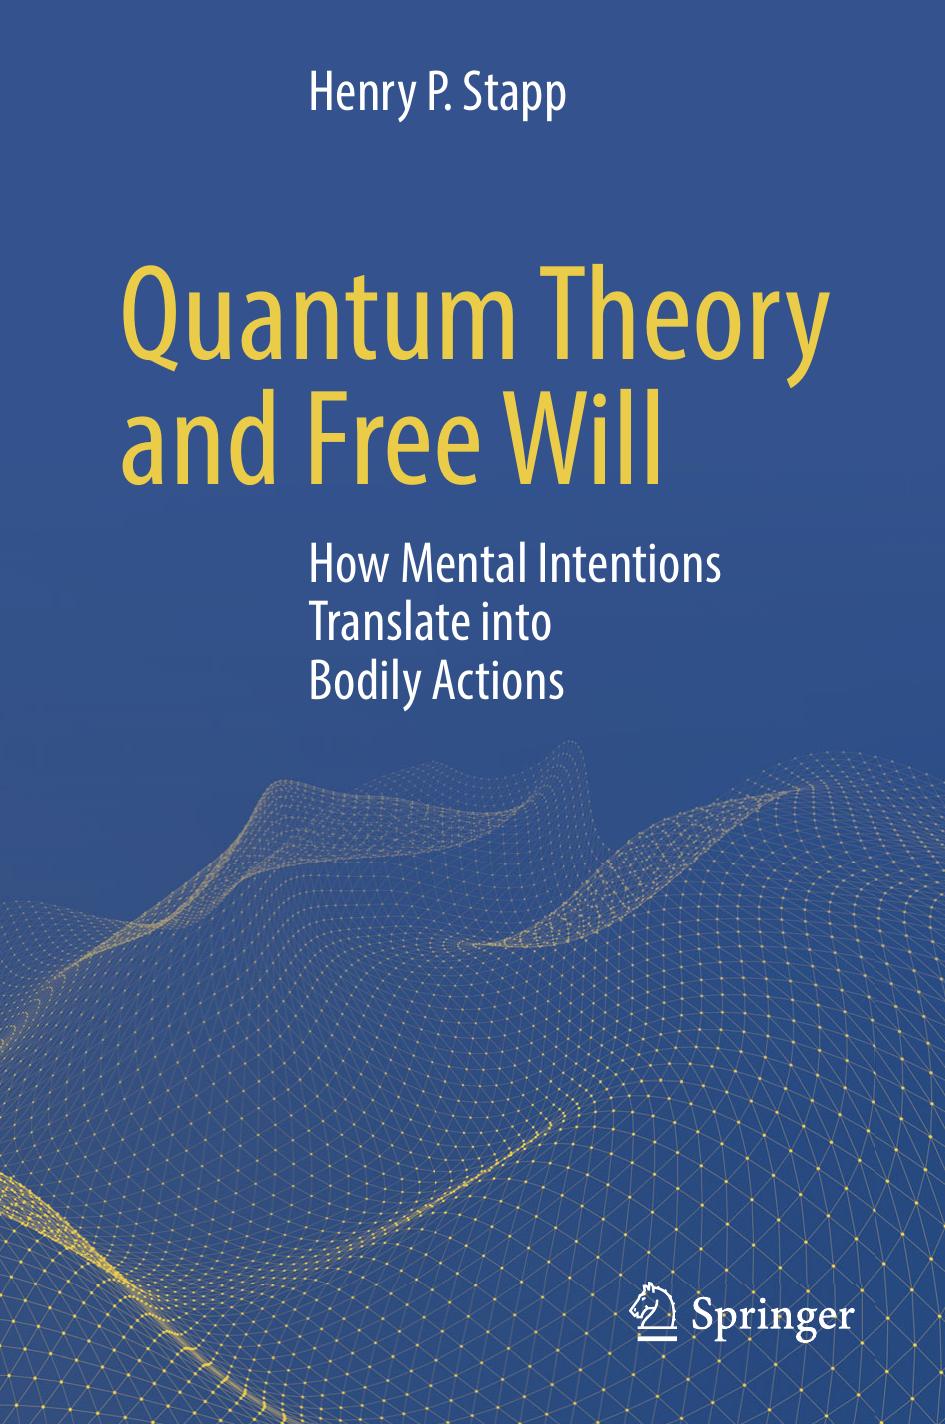 Quantum Theory and Free Will: How Mental Intentions Translate Into Bodily Actions